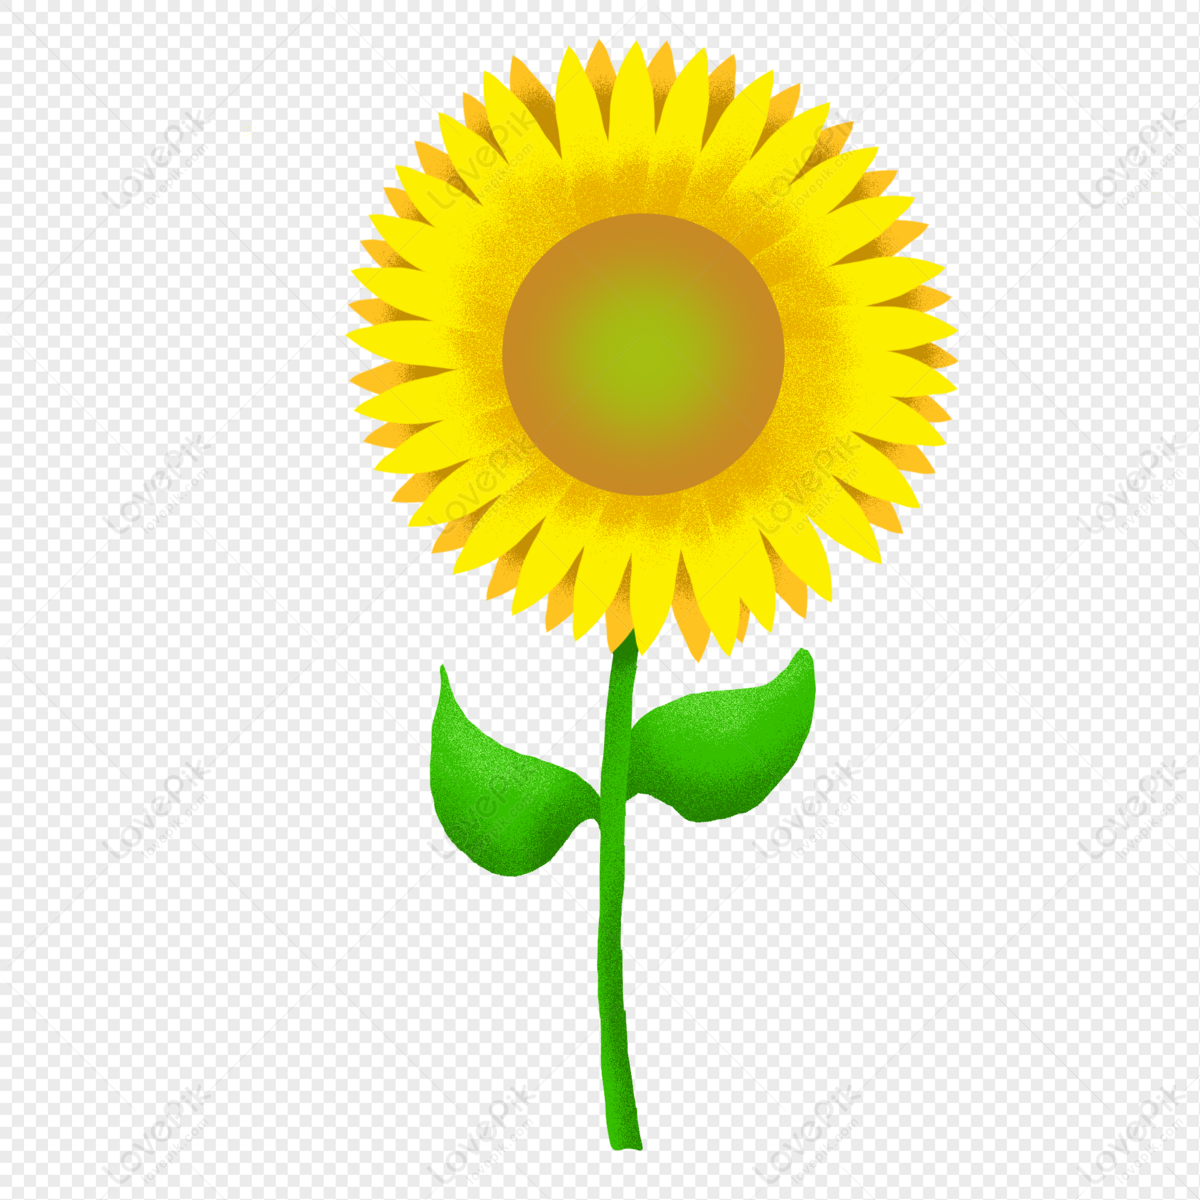 Sunflower Cartoon Material Download PNG Transparent Background And Clipart  Image For Free Download - Lovepik | 401190480